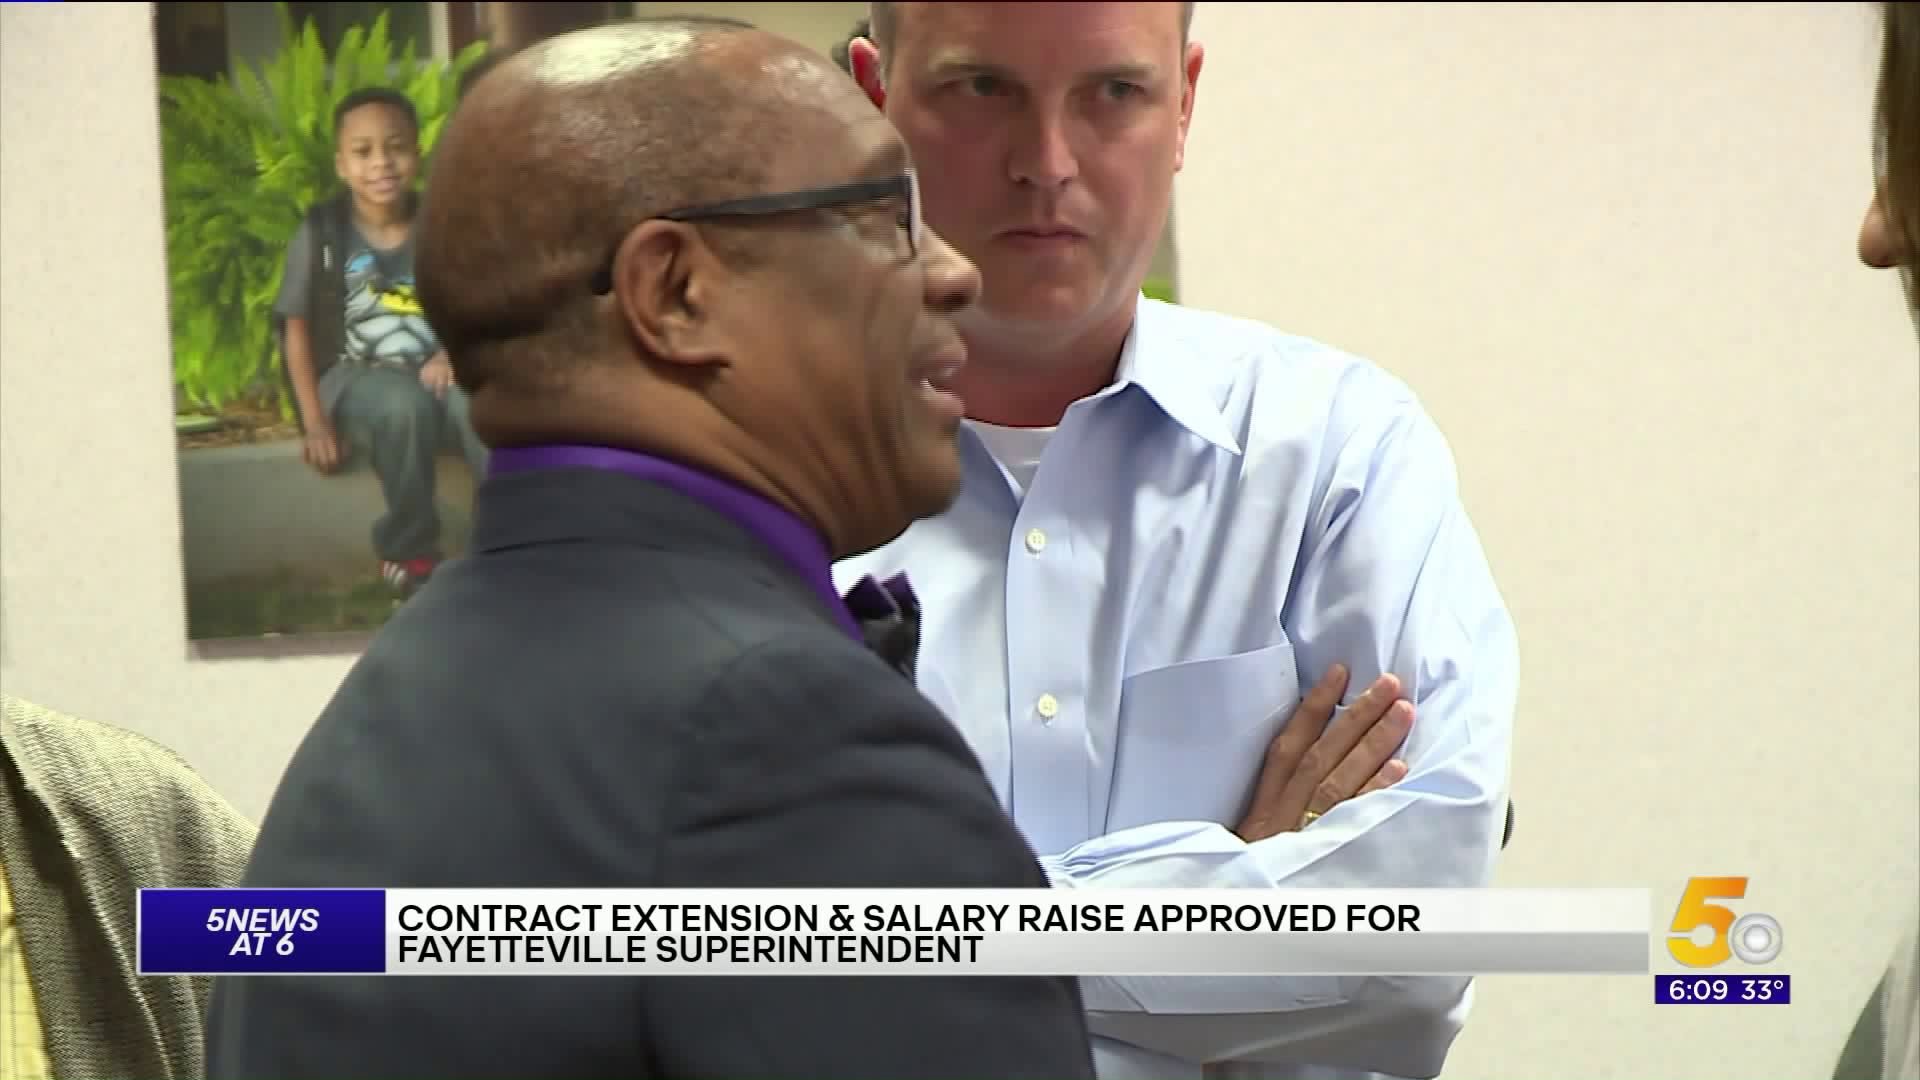 Board Approves Contract Extension And Salary Raise For Fayetteville Superintendent